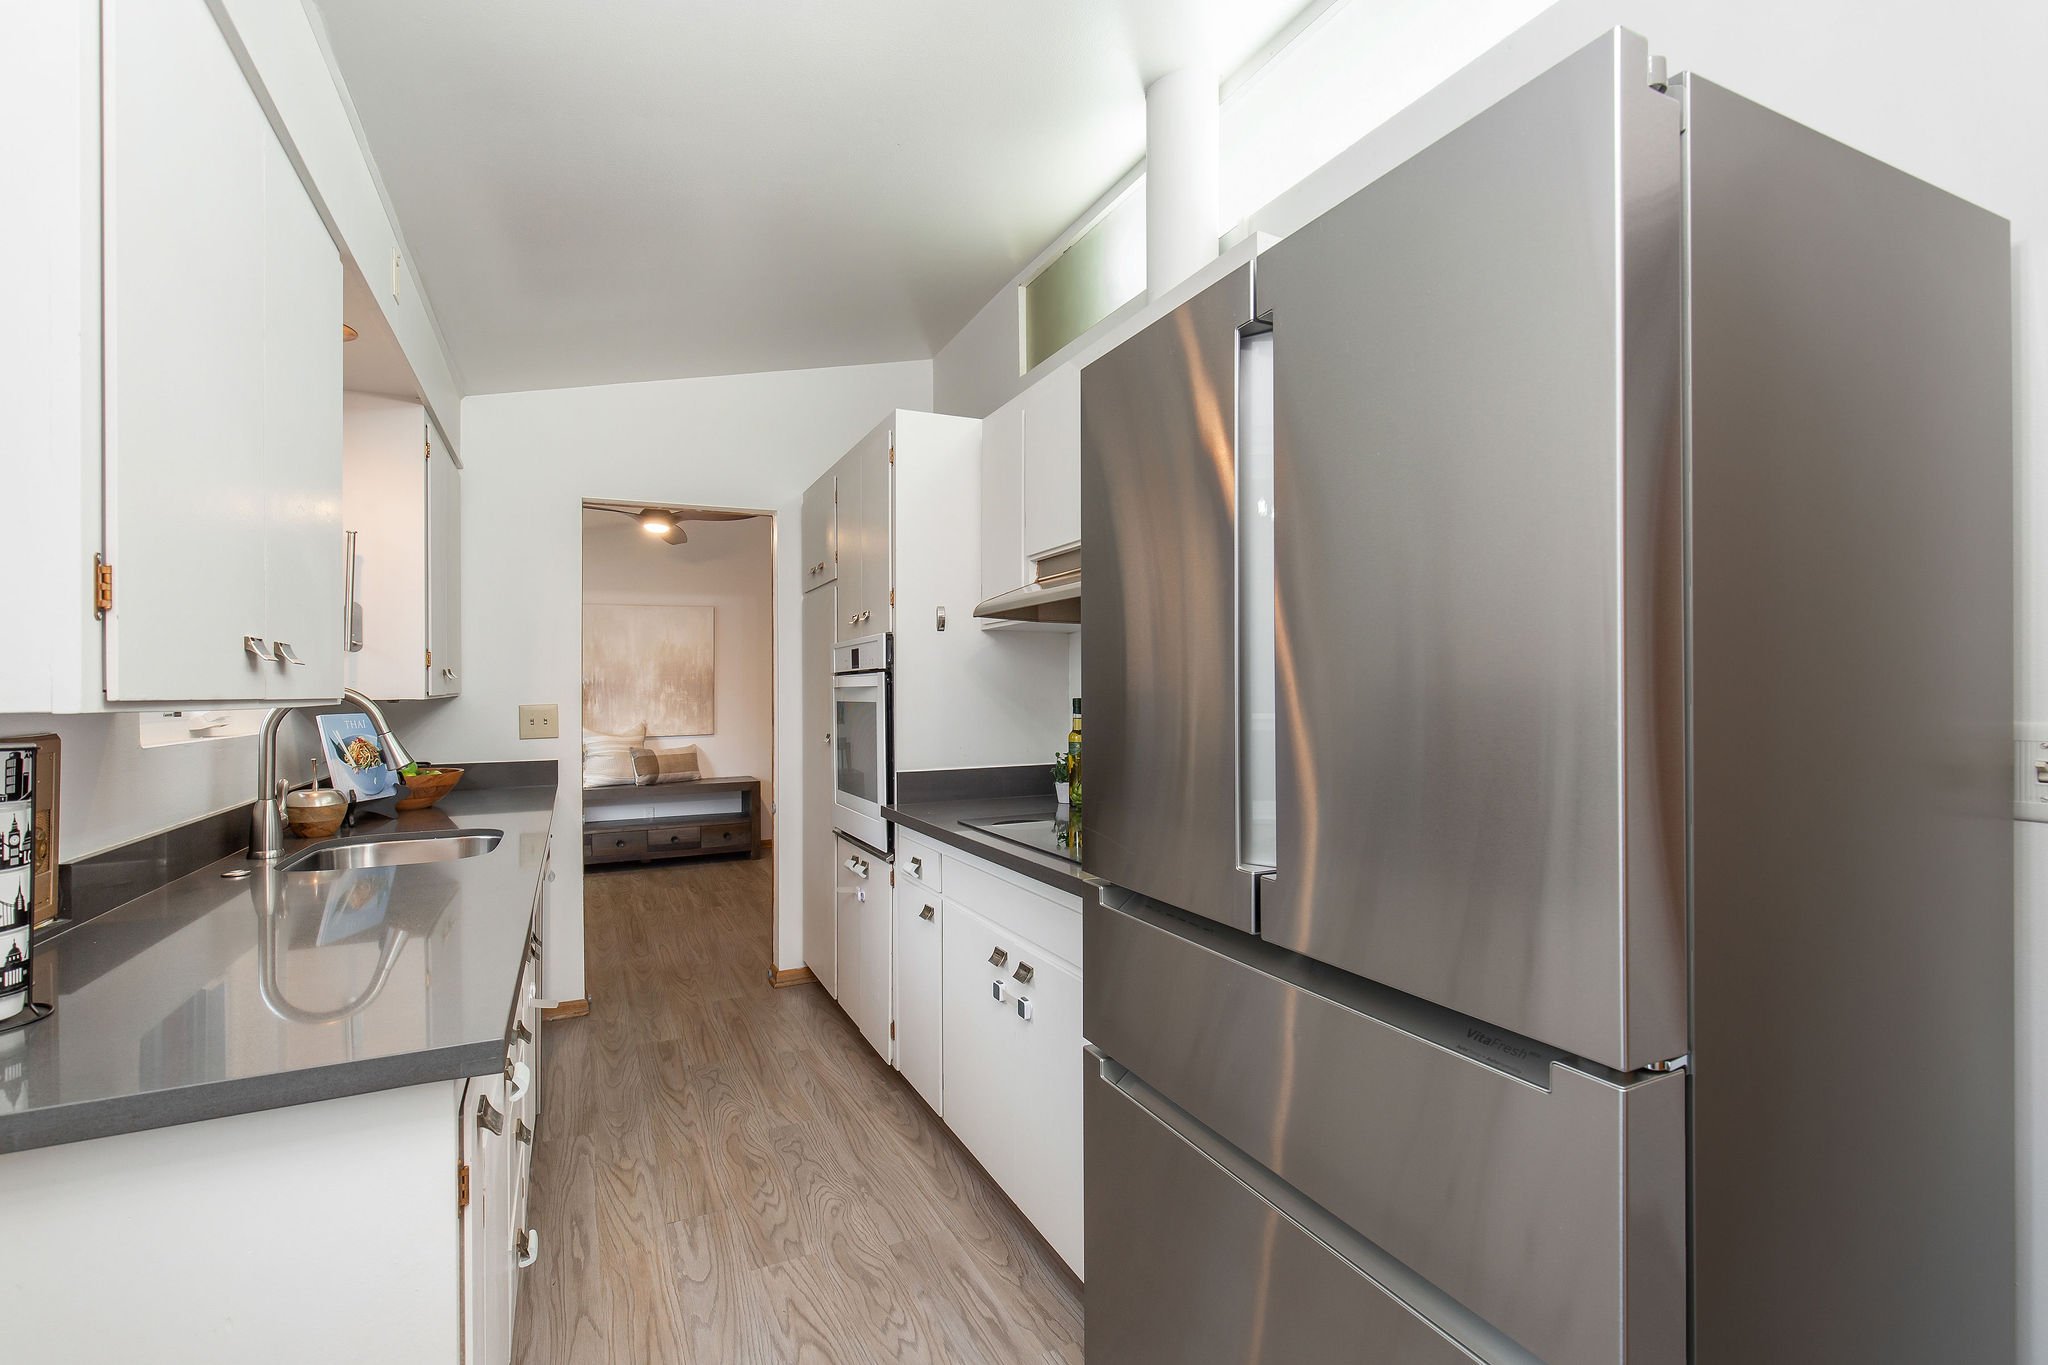  image description: interior of kitchen wit grey countertops, white cabinets, and windows 